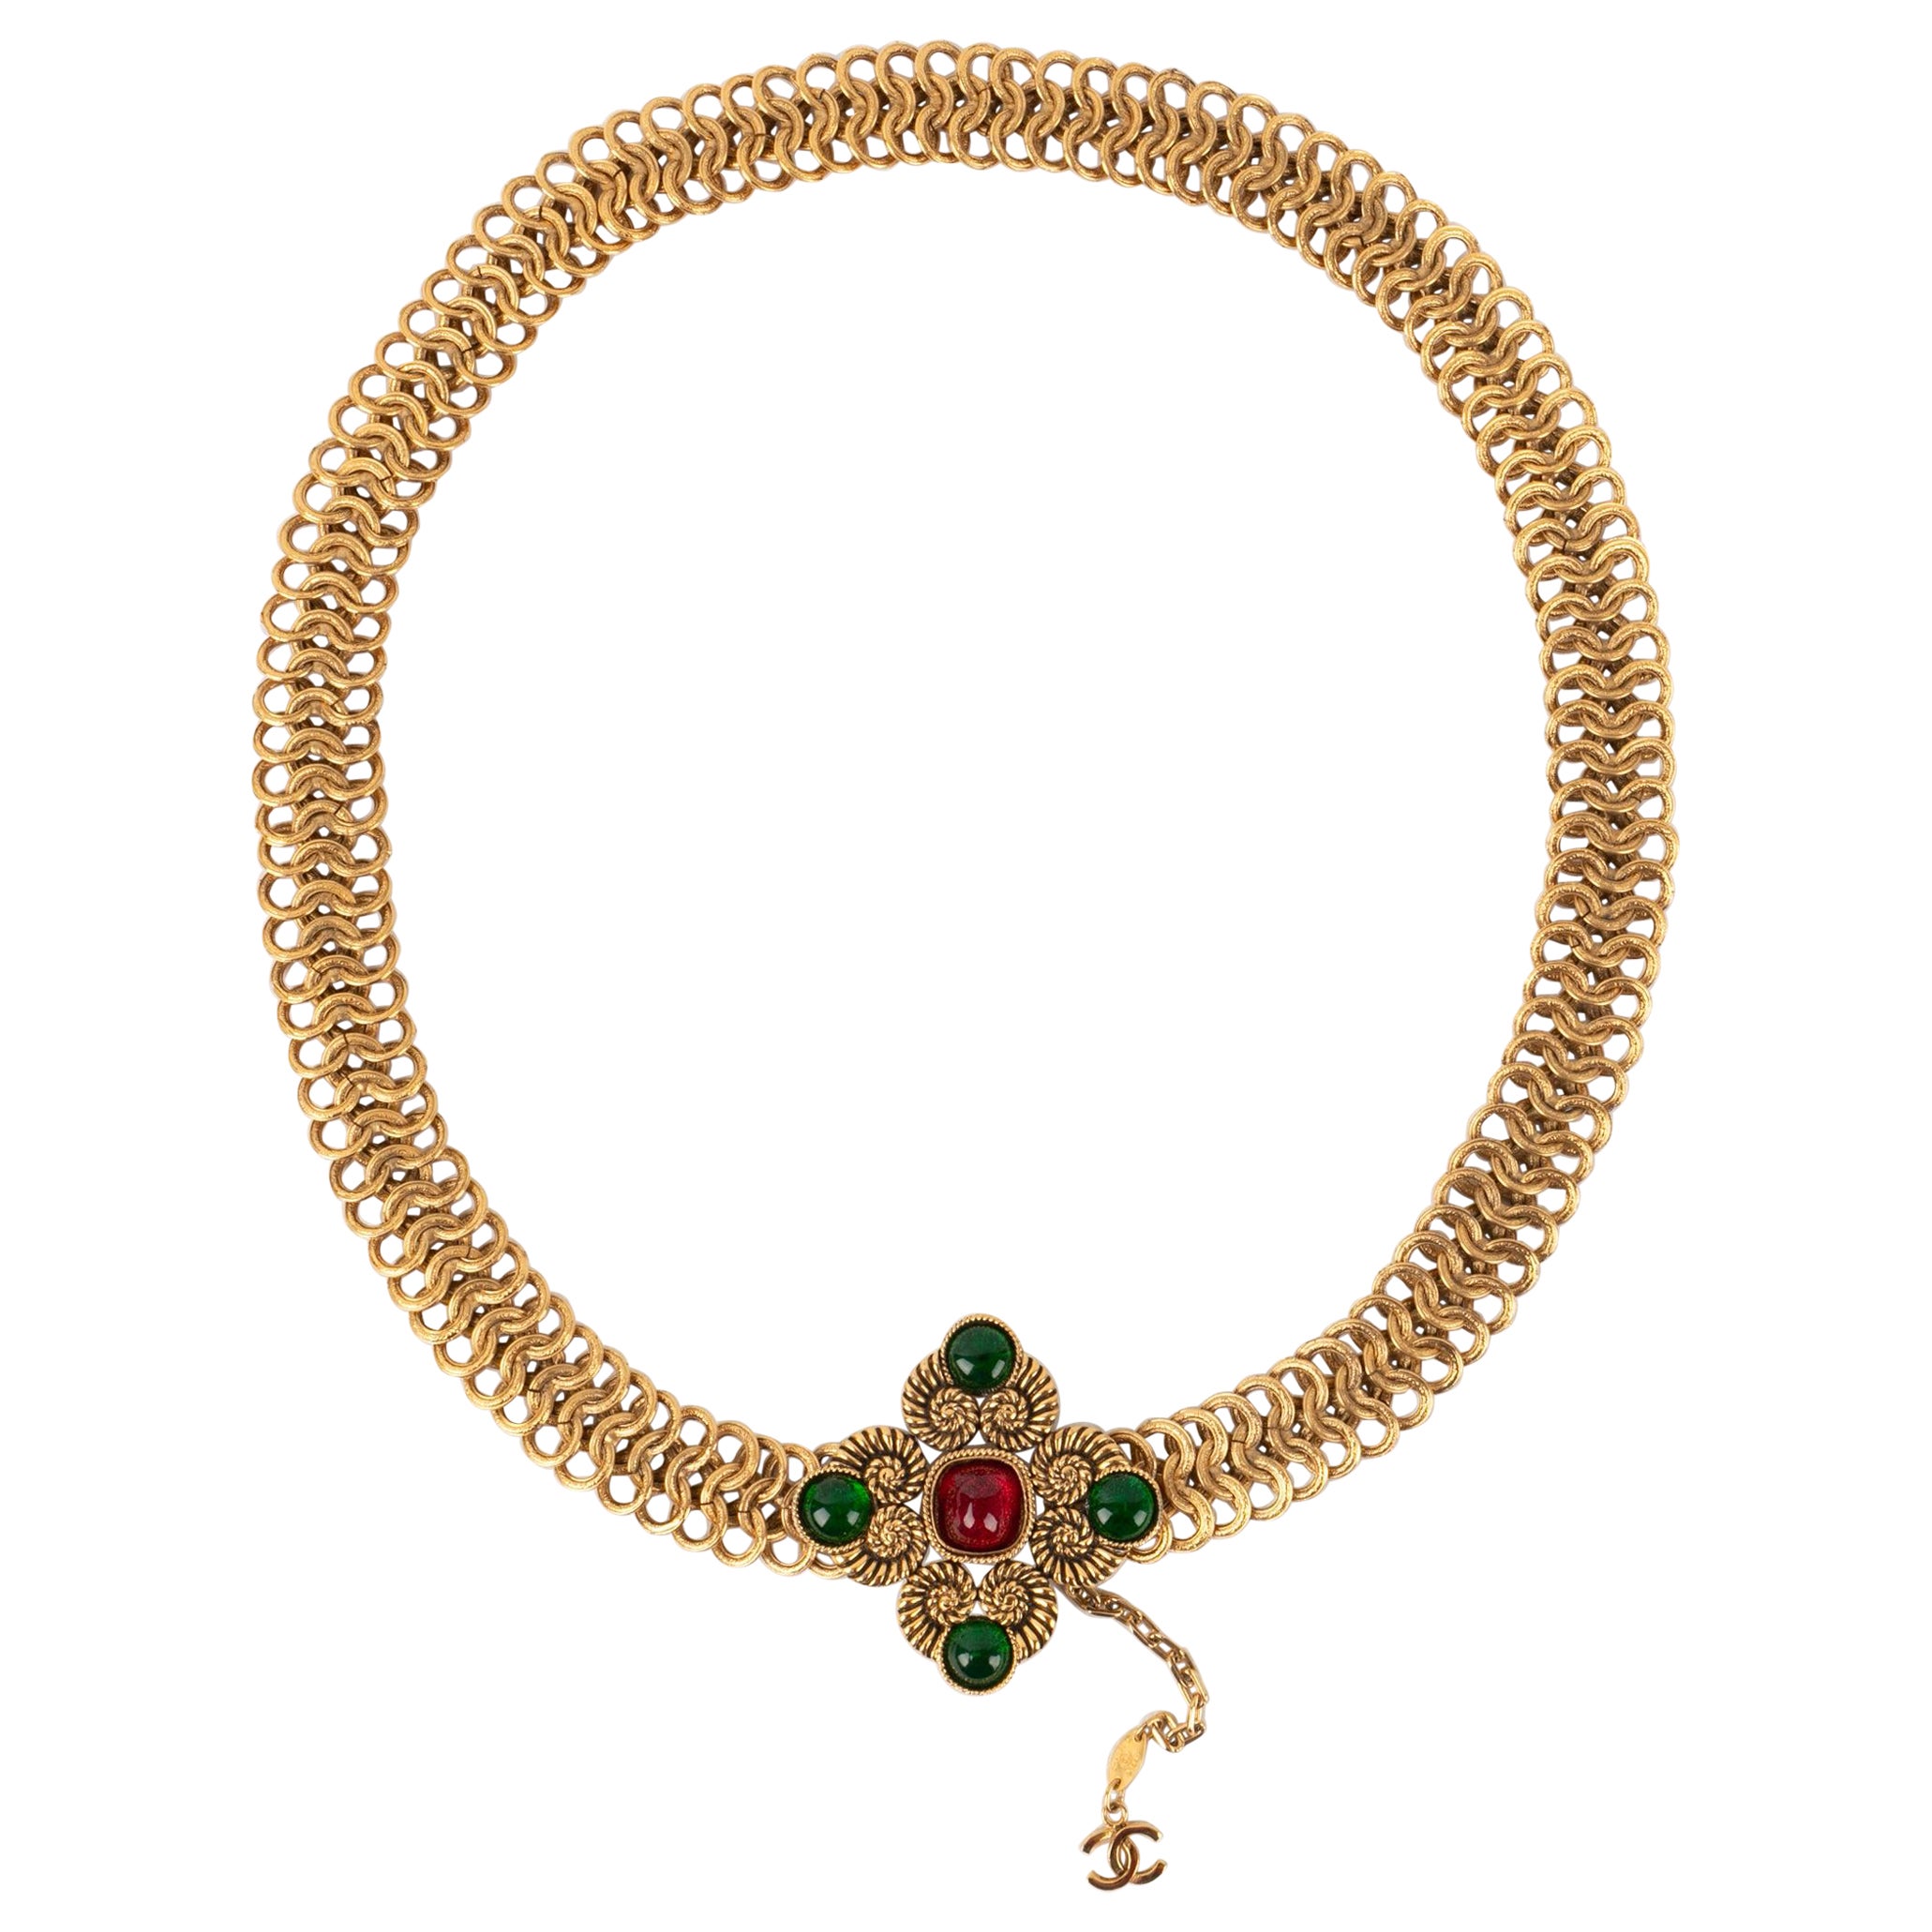 Chanel Golden Metal Belt with Green and Red Glass Paste, 1985